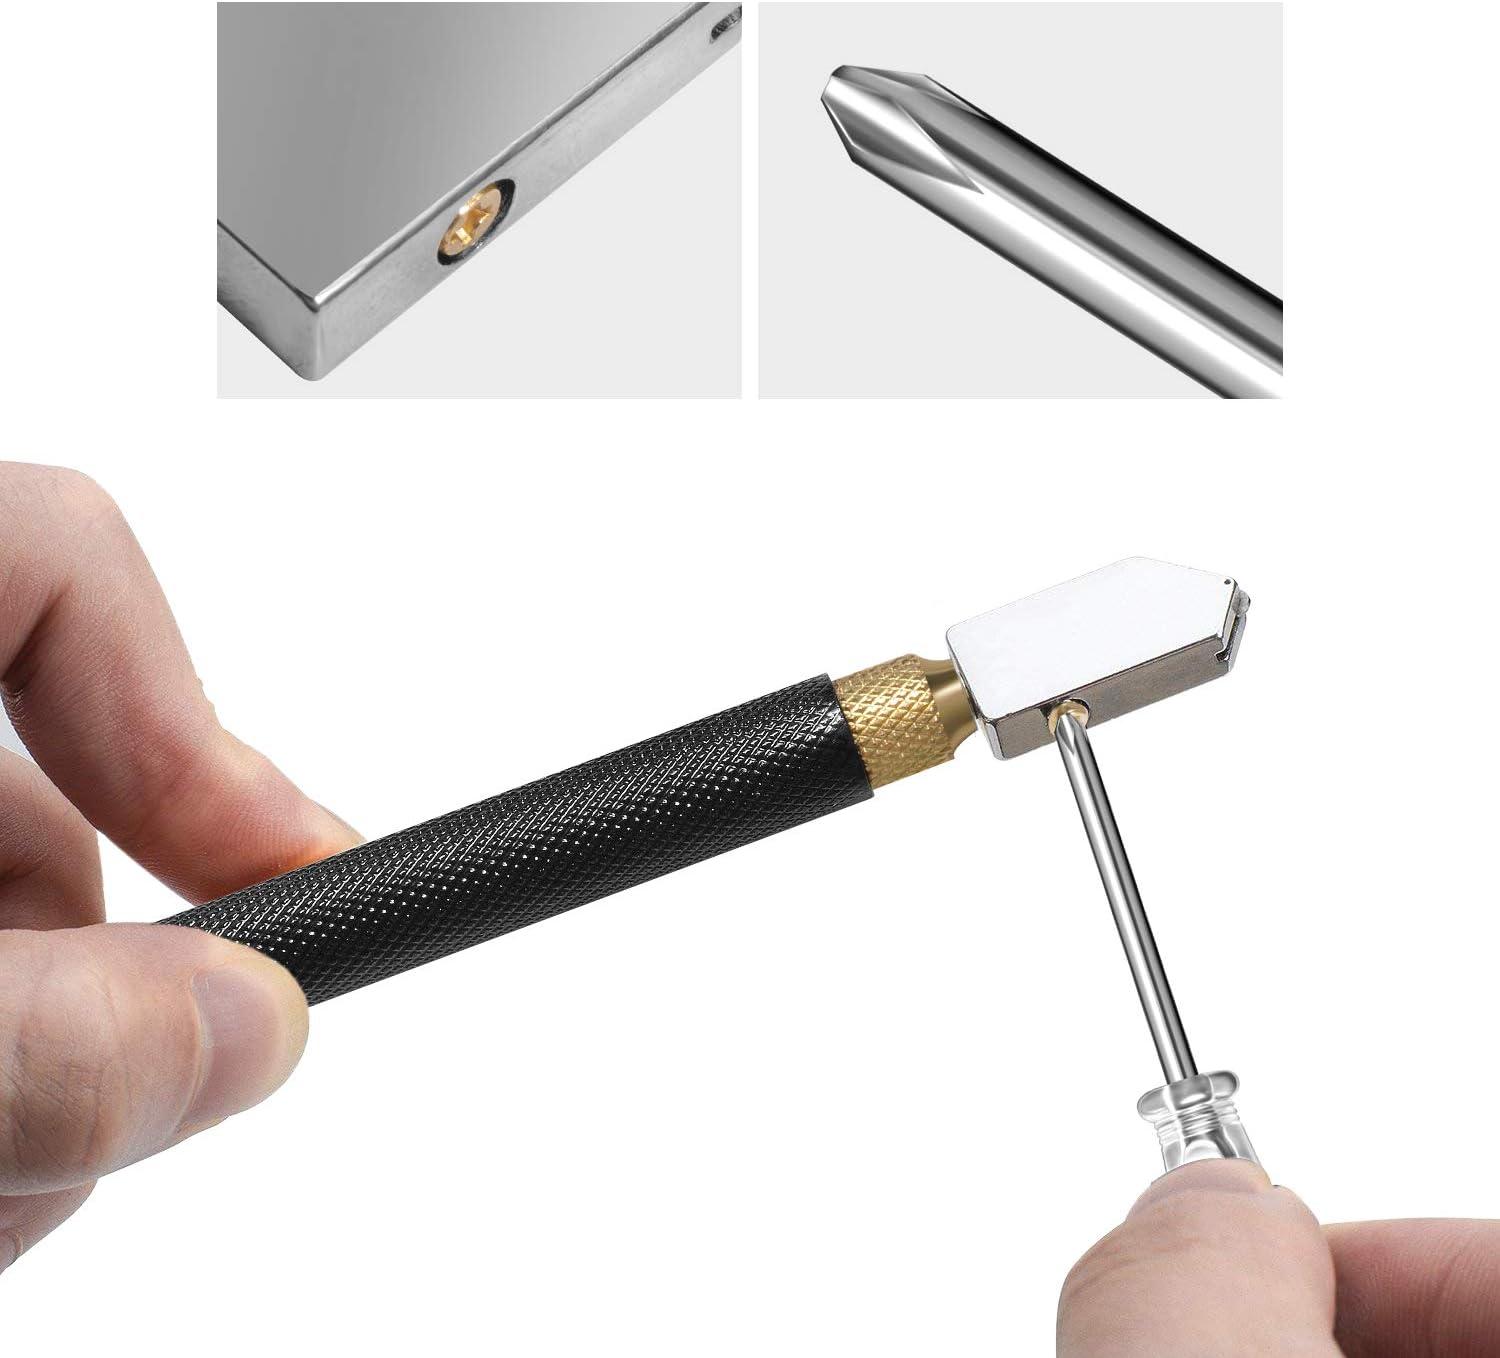 Glass Cutter Tools DIY Glass Cutting Kit 2 mm – 8 mm Pencil Style Oil Feed Carbide Tip Mirror Cutter Kit Professional for Stained Glass, Window